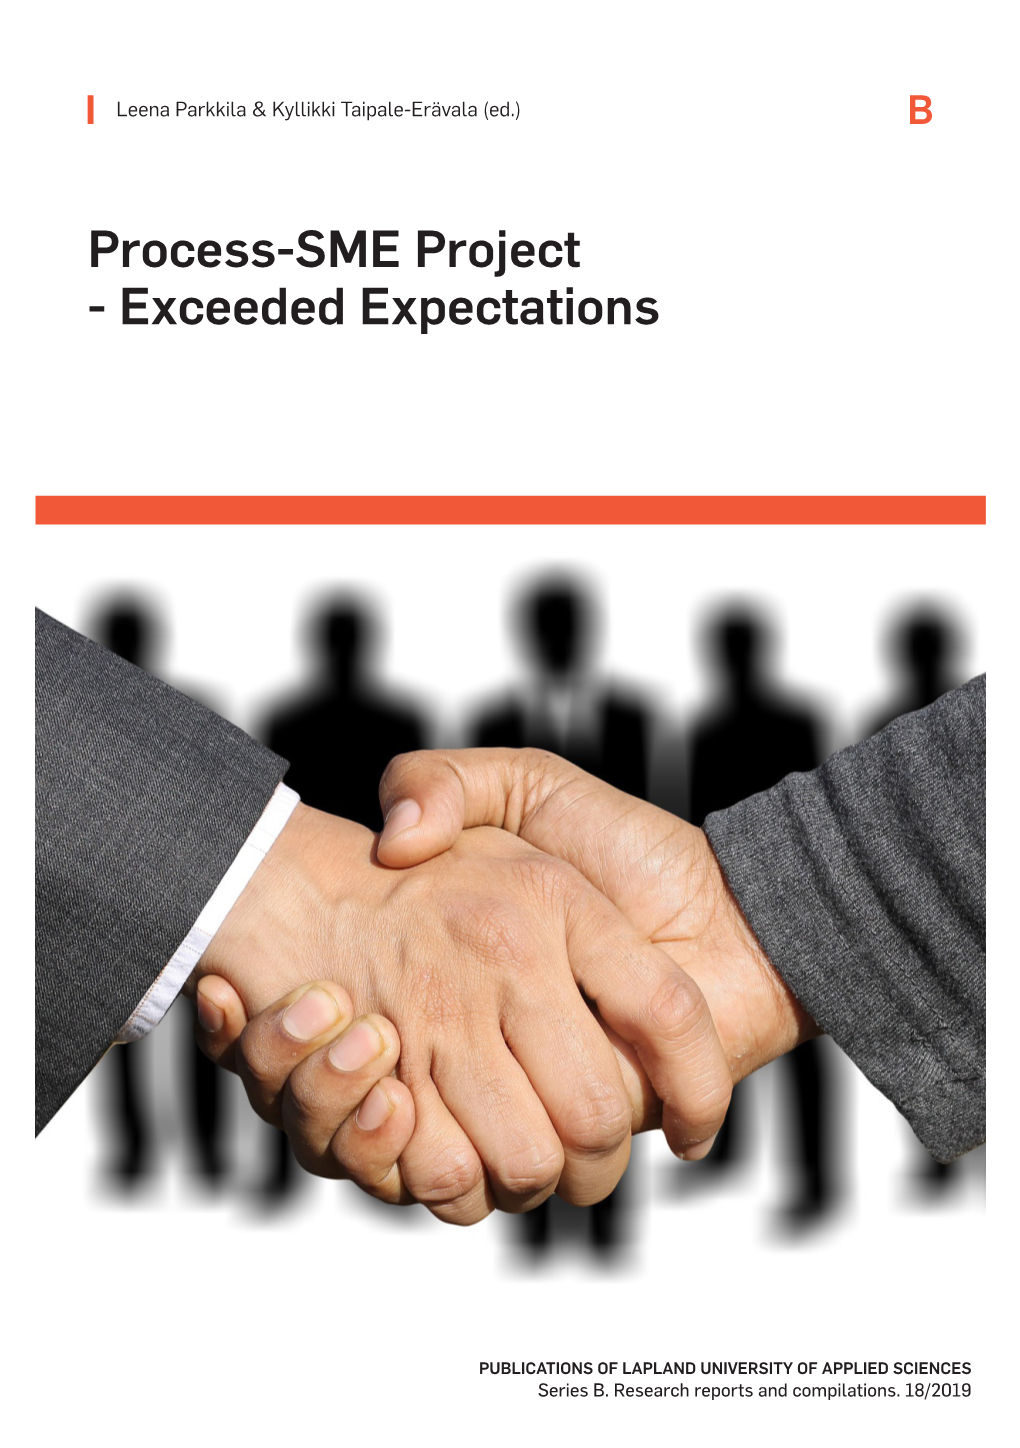 Process-SME Project - Exceeded Expectations